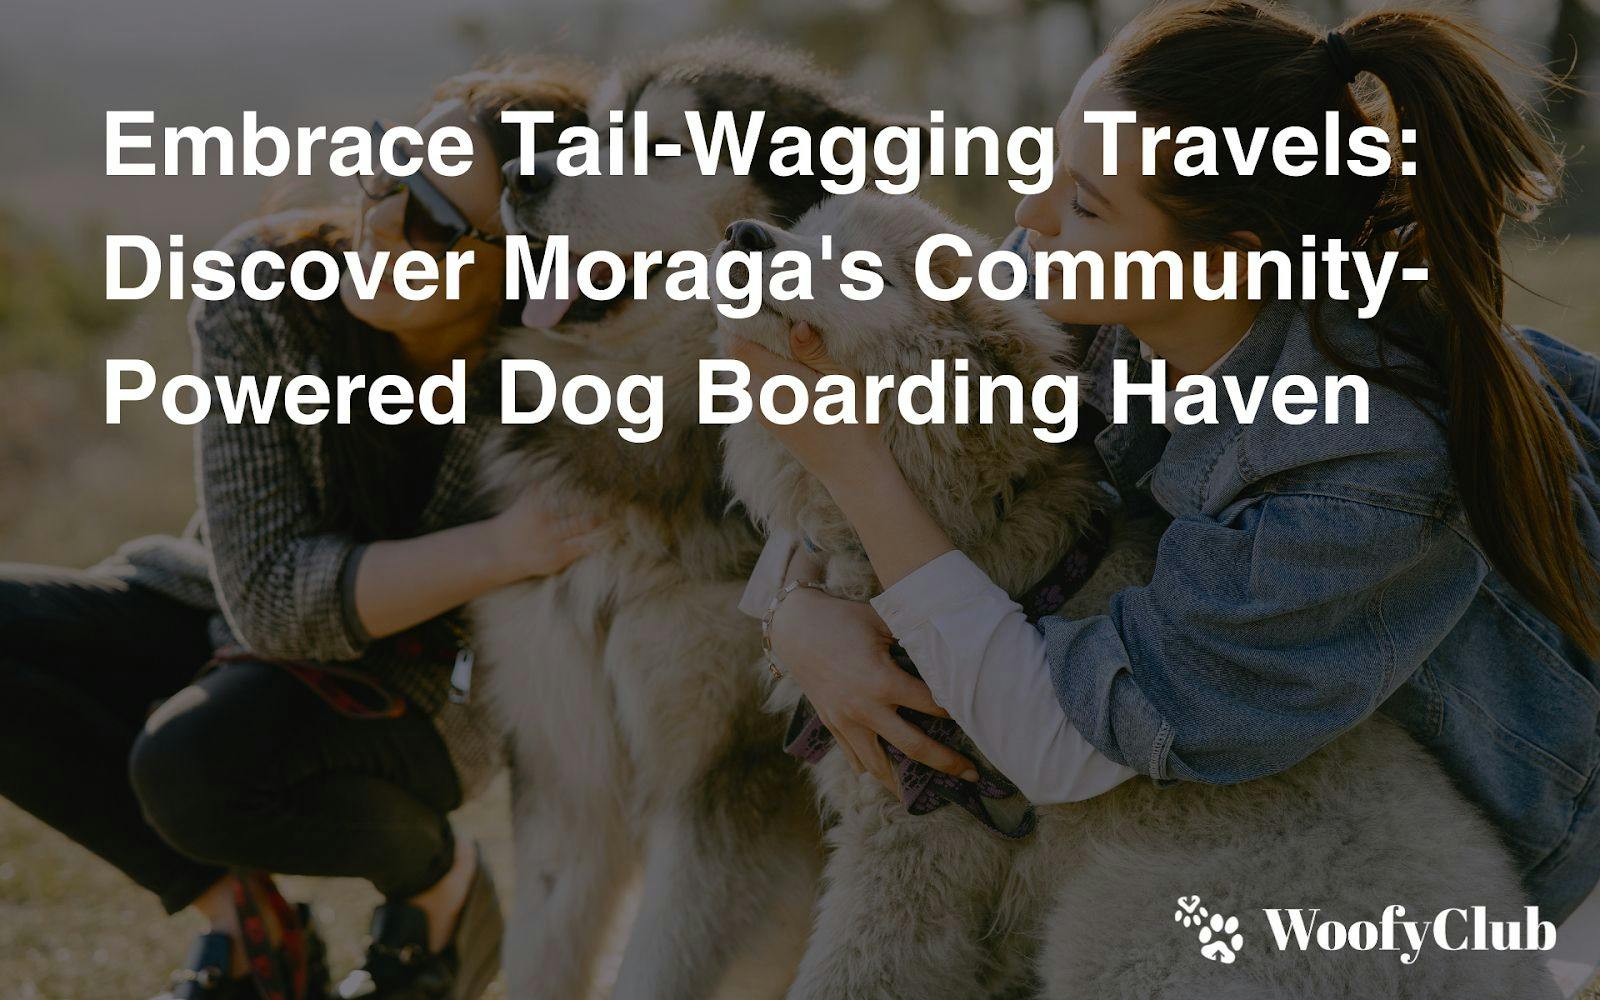 Embrace Tail-Wagging Travels: Discover Moraga's Community-Powered Dog Boarding Haven